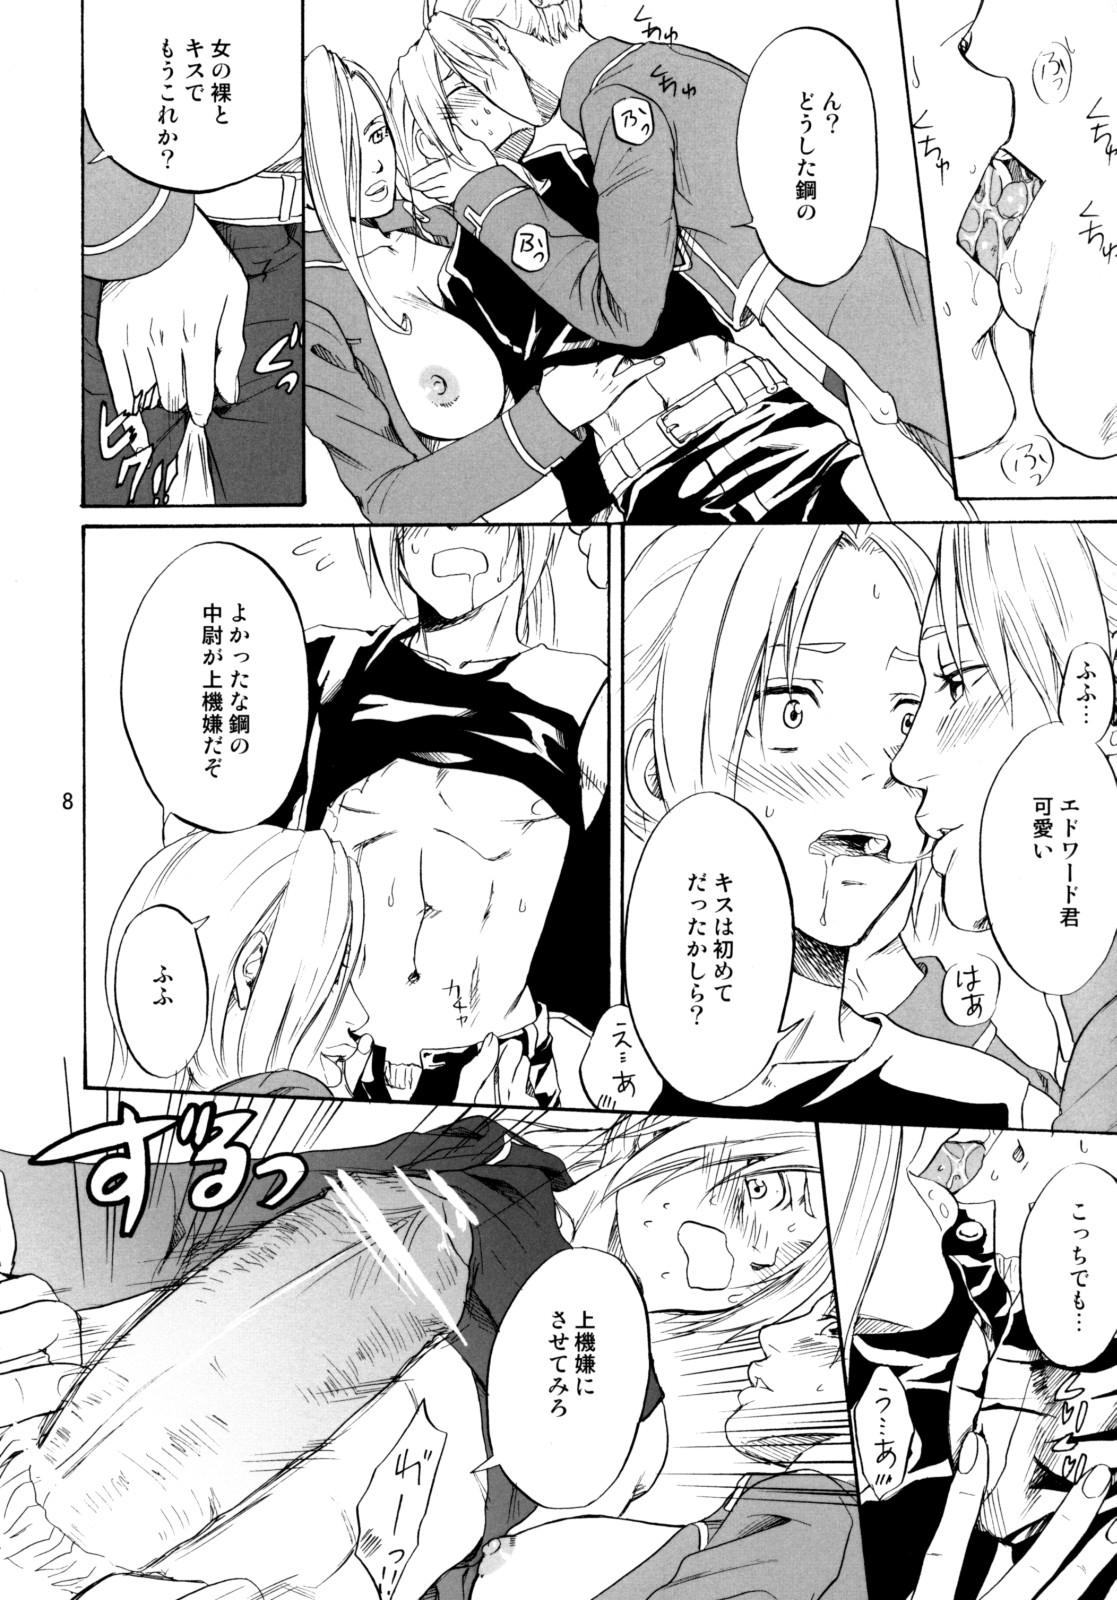 Cheating SOIX 3 - Fullmetal alchemist Chat - Page 8